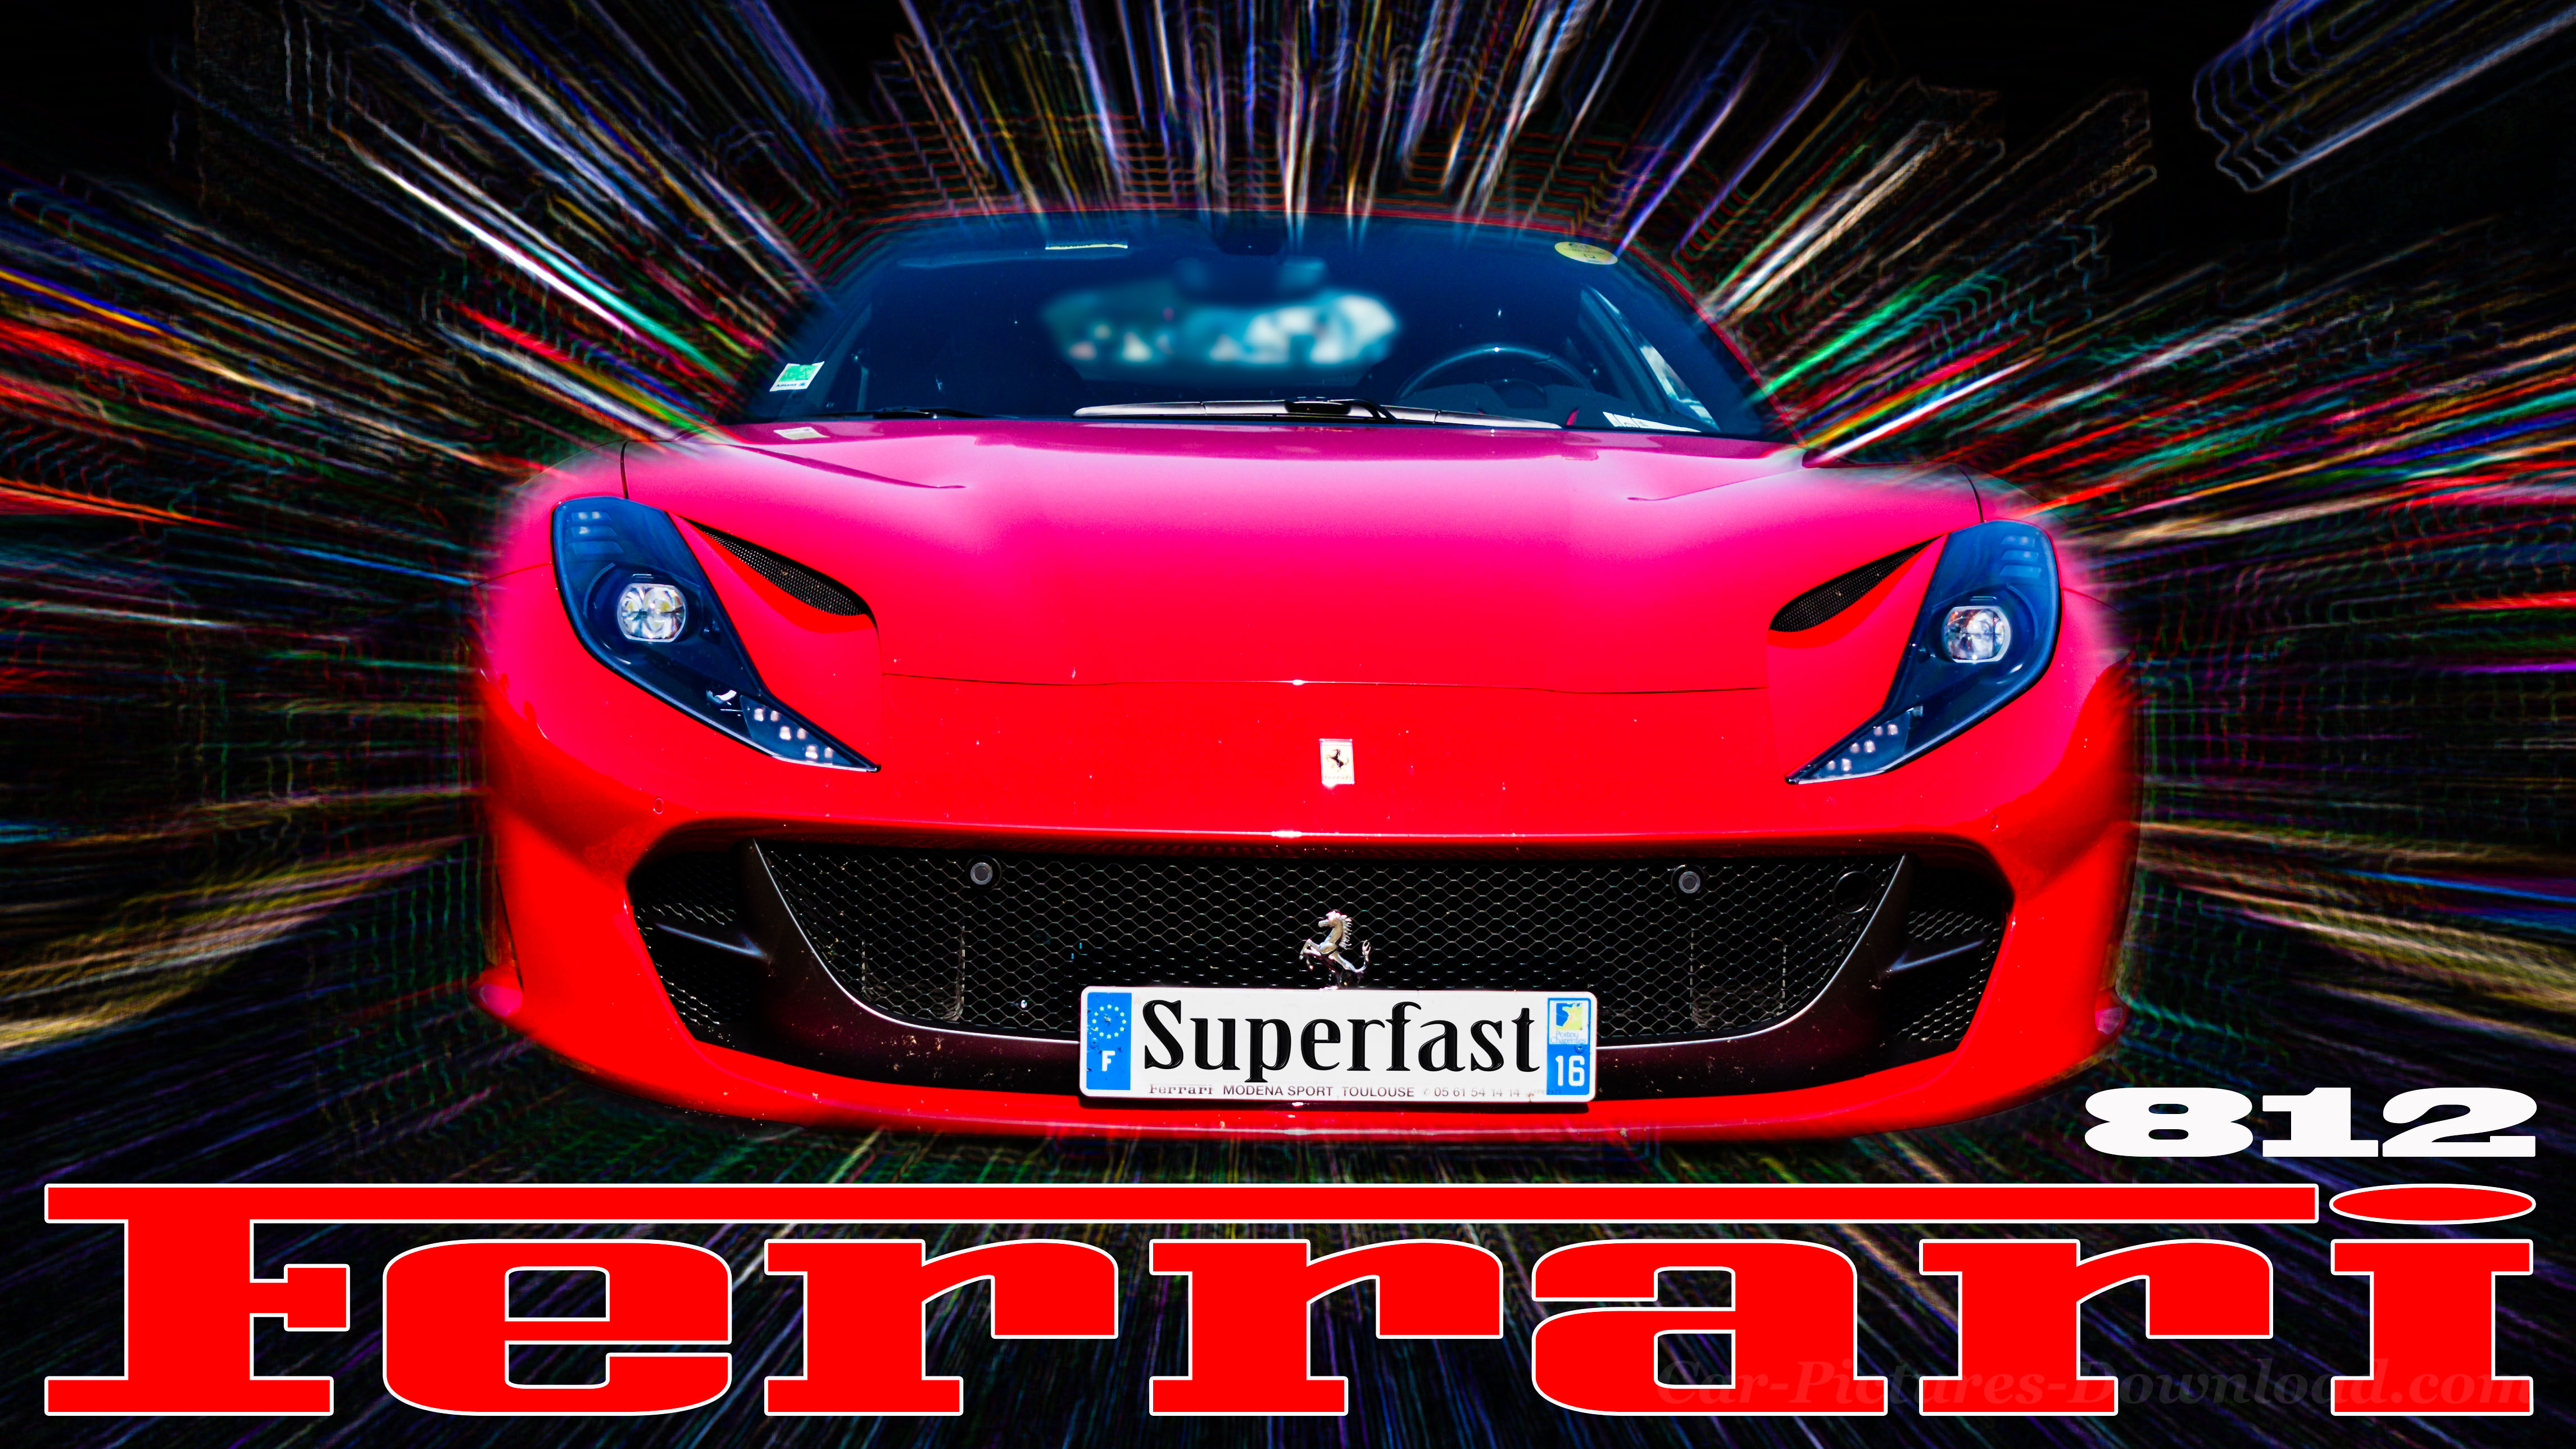 Ferrari Wallpaper HD All Devices In Best Quality